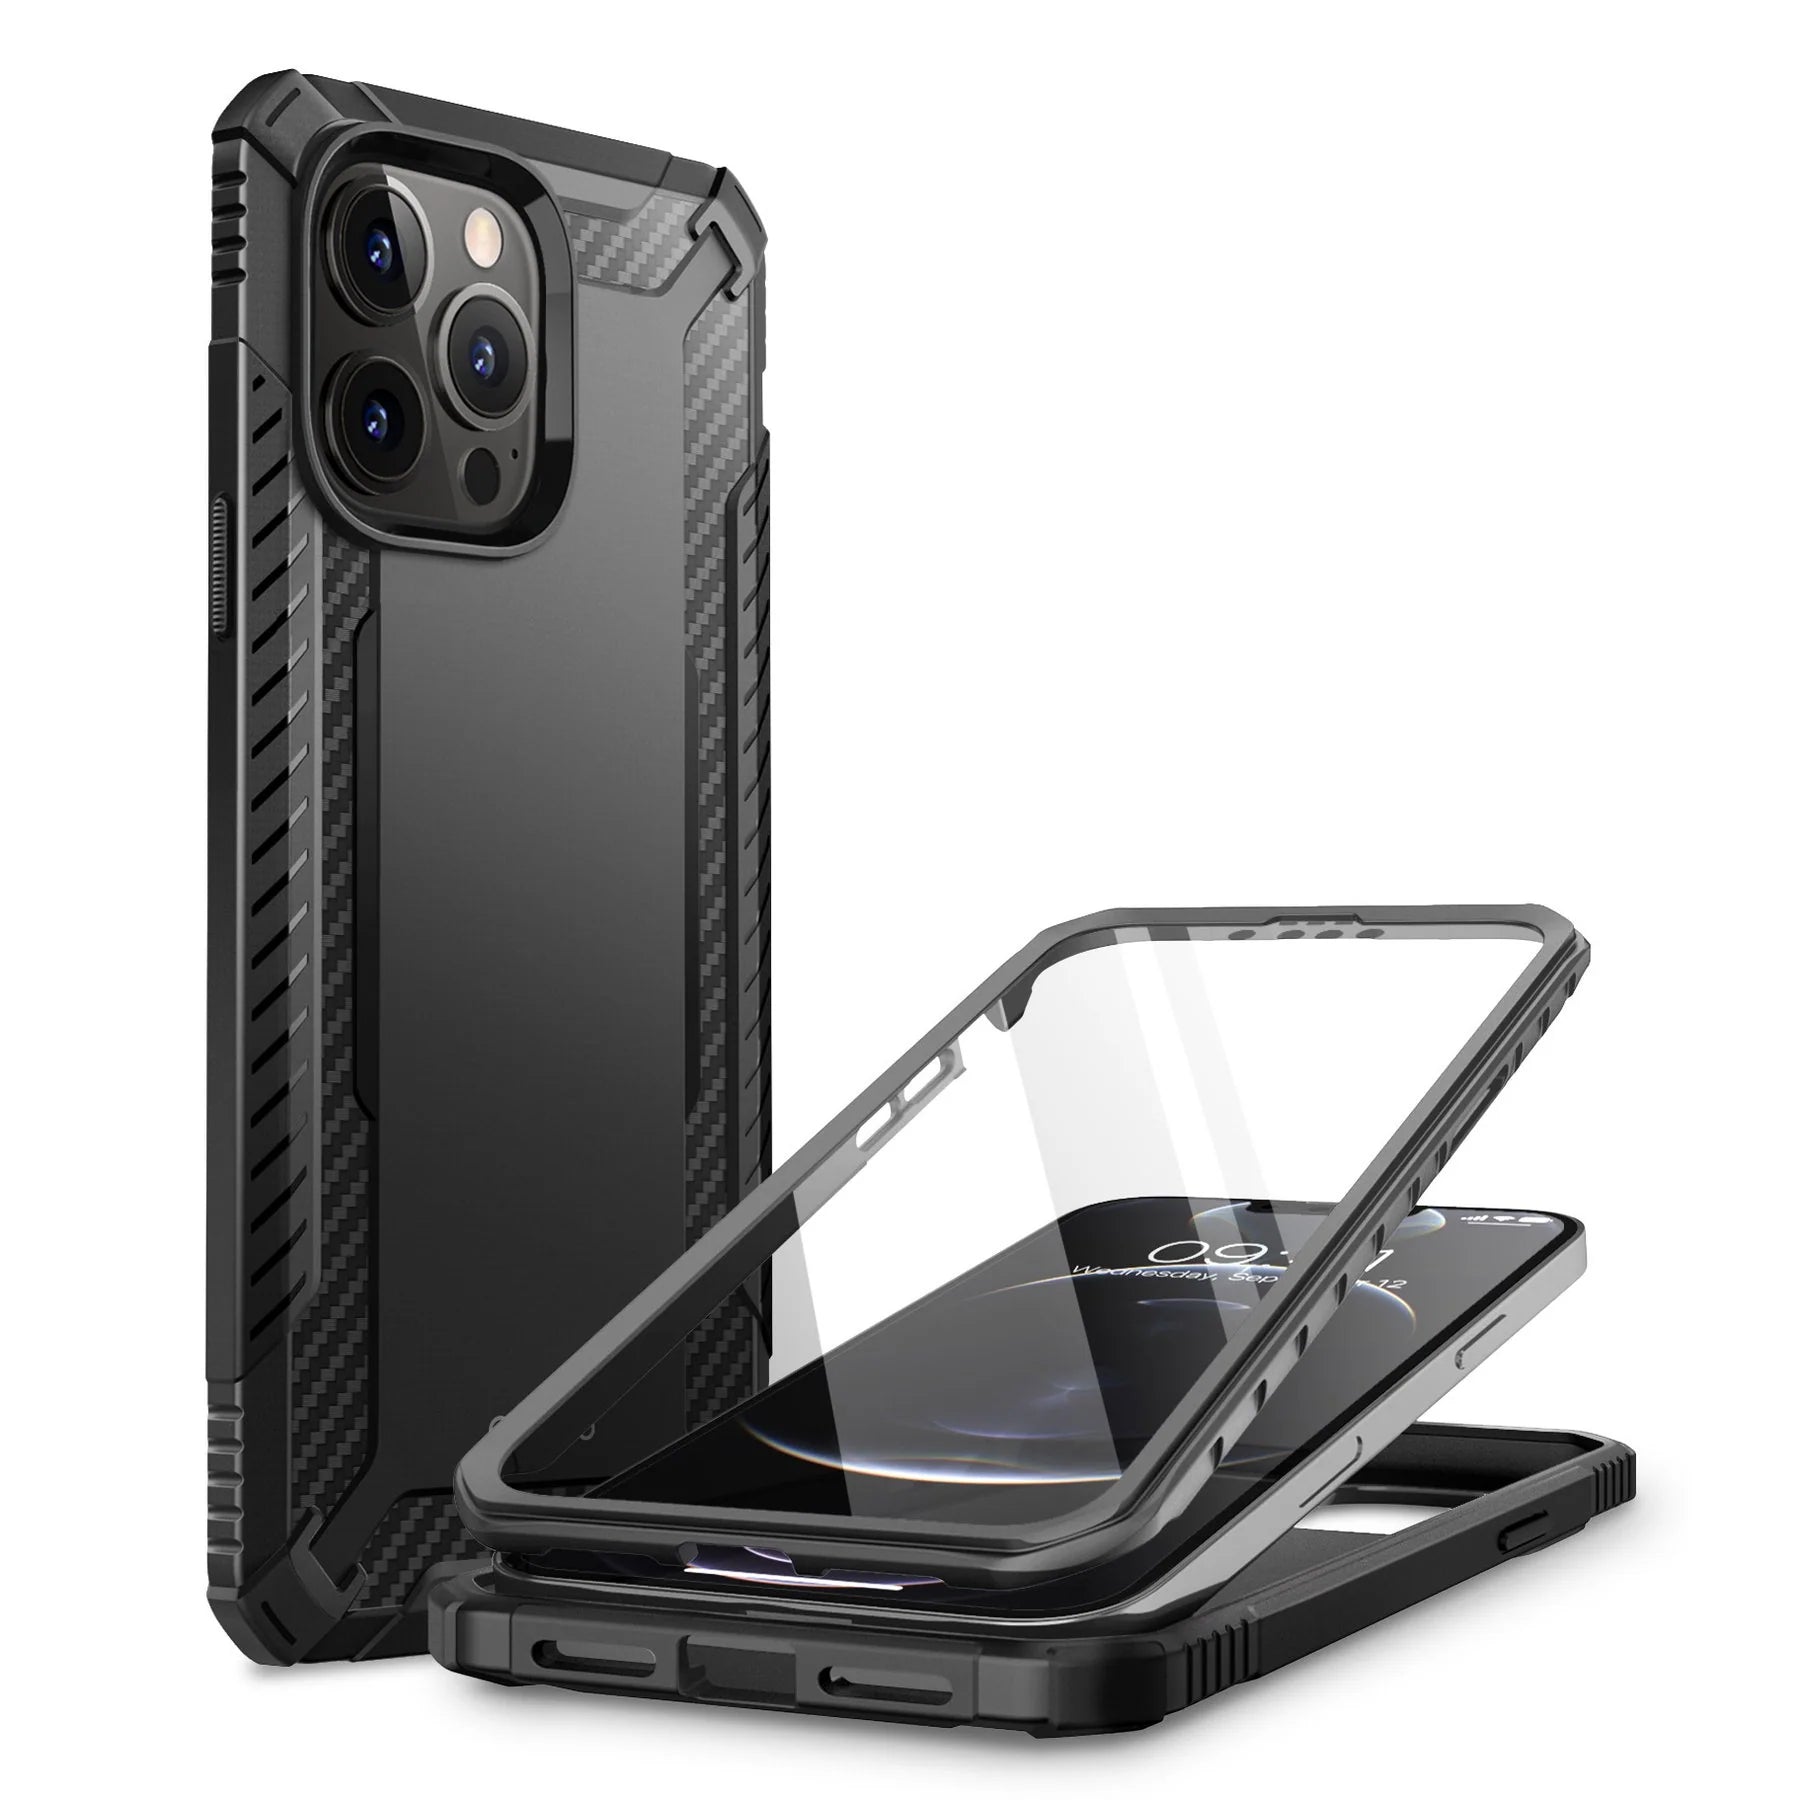 Clayco Xenon Full-Body Rugged Case for iPhone 13 Pro Max (2021) with Built-in Screen Protector